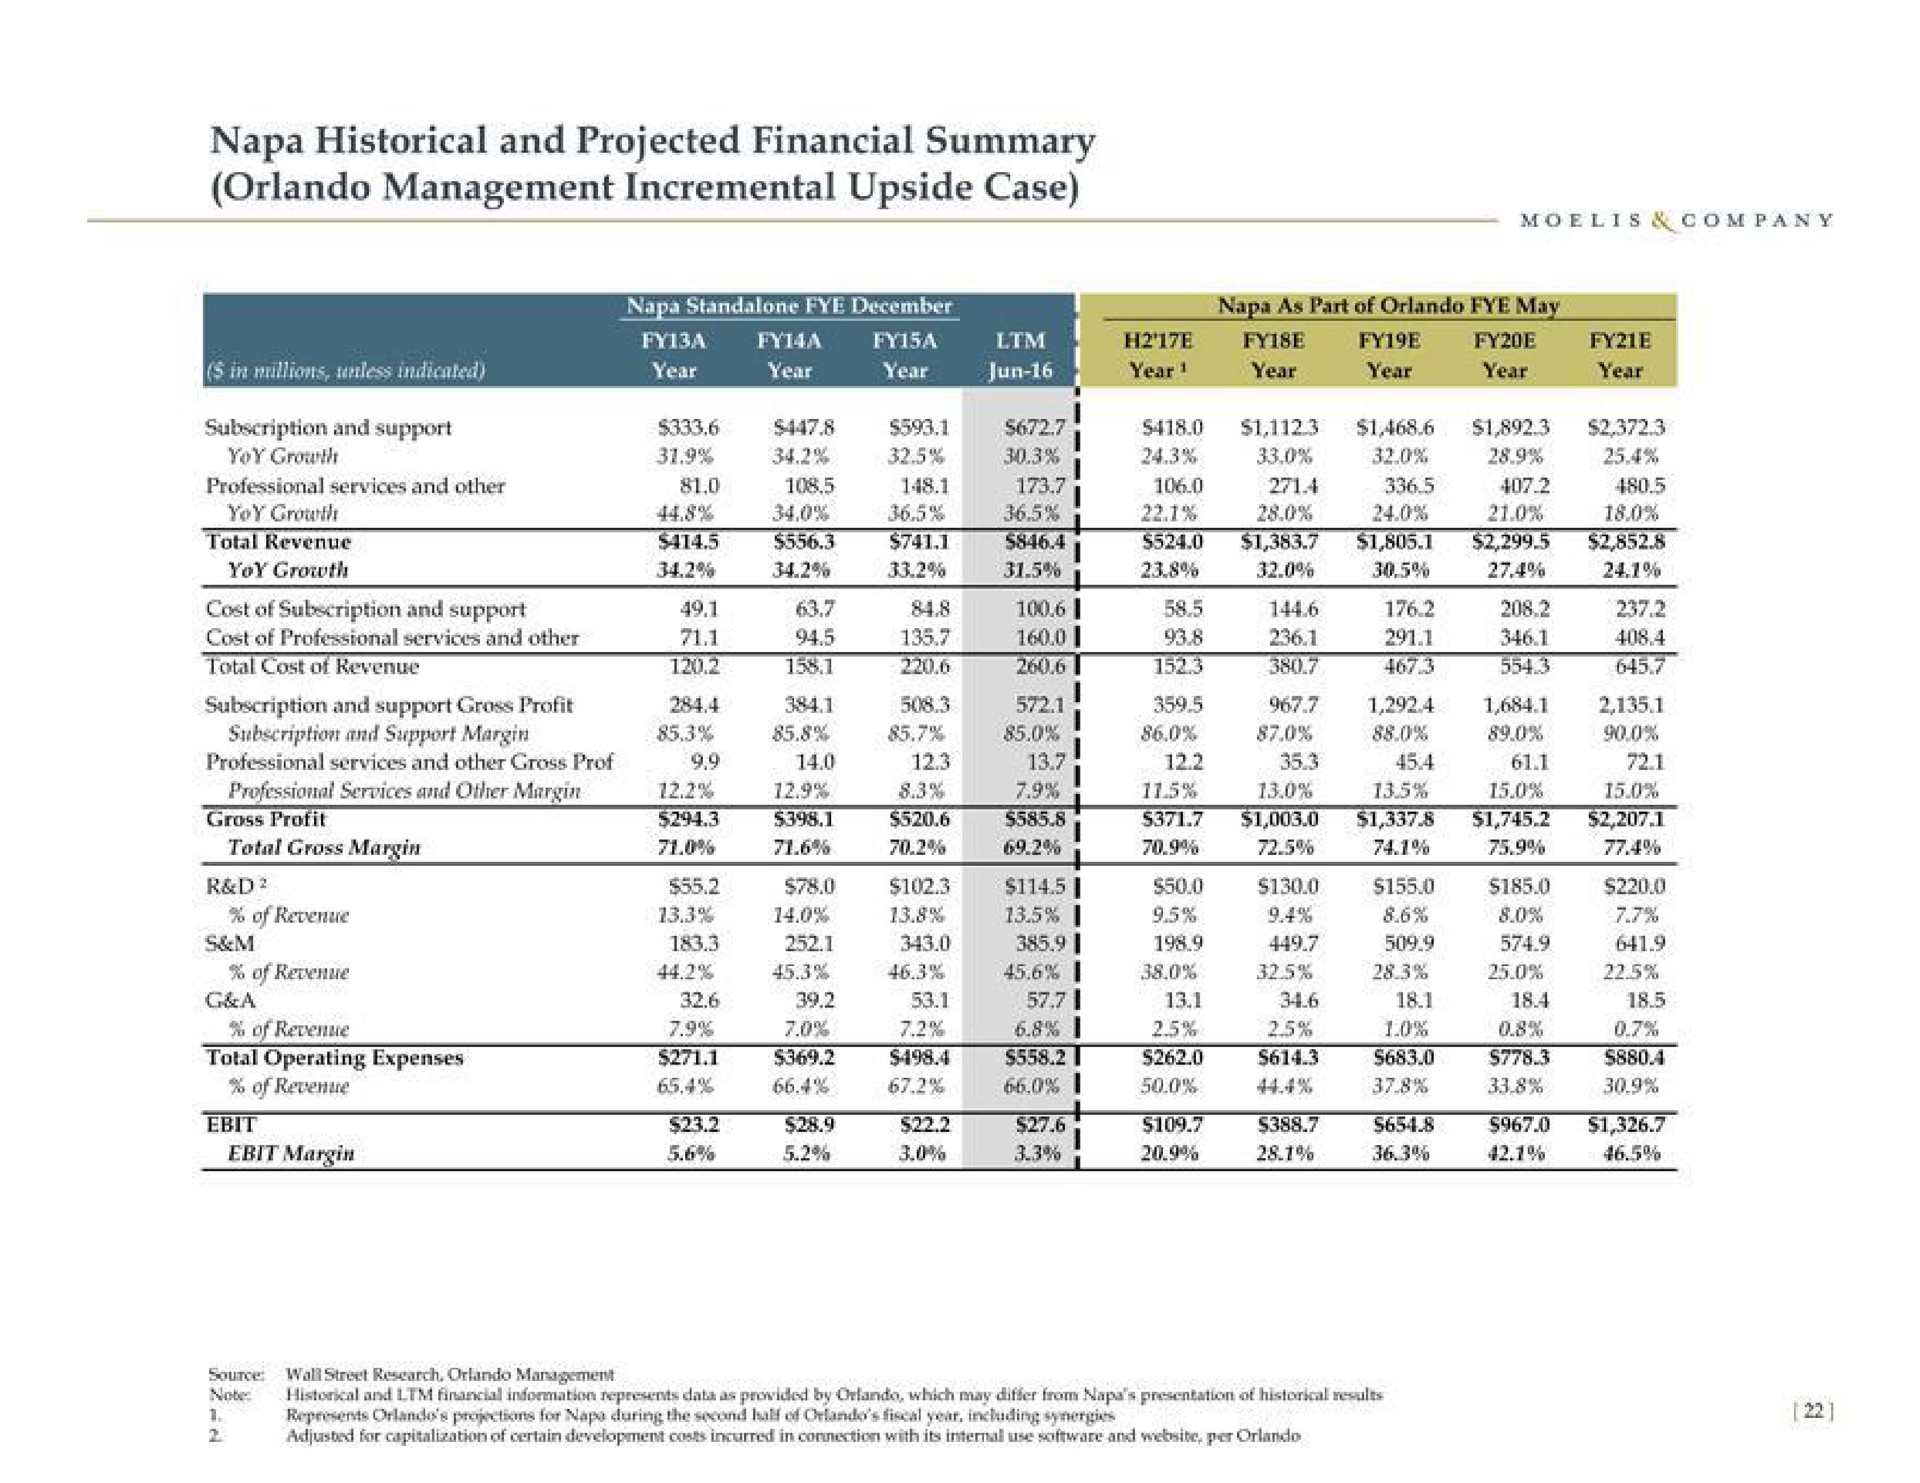 napa historical and projected financial summary management incremental upside case margin | Moelis & Company